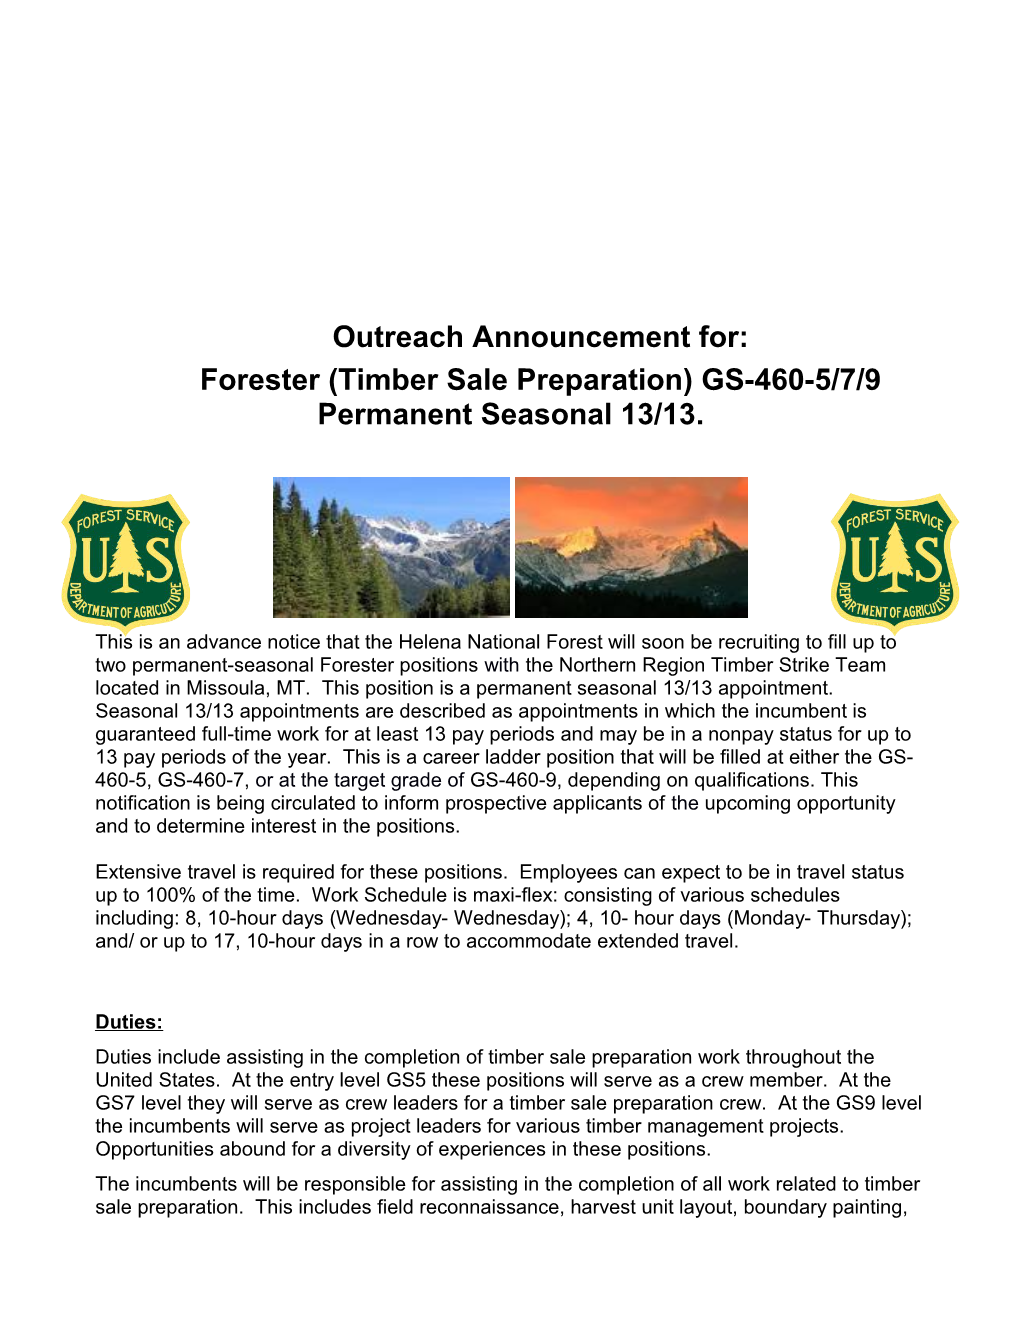 Forester (Timber Sale Preparation) GS-460-5/7/9 Permanent Seasonal 13/13